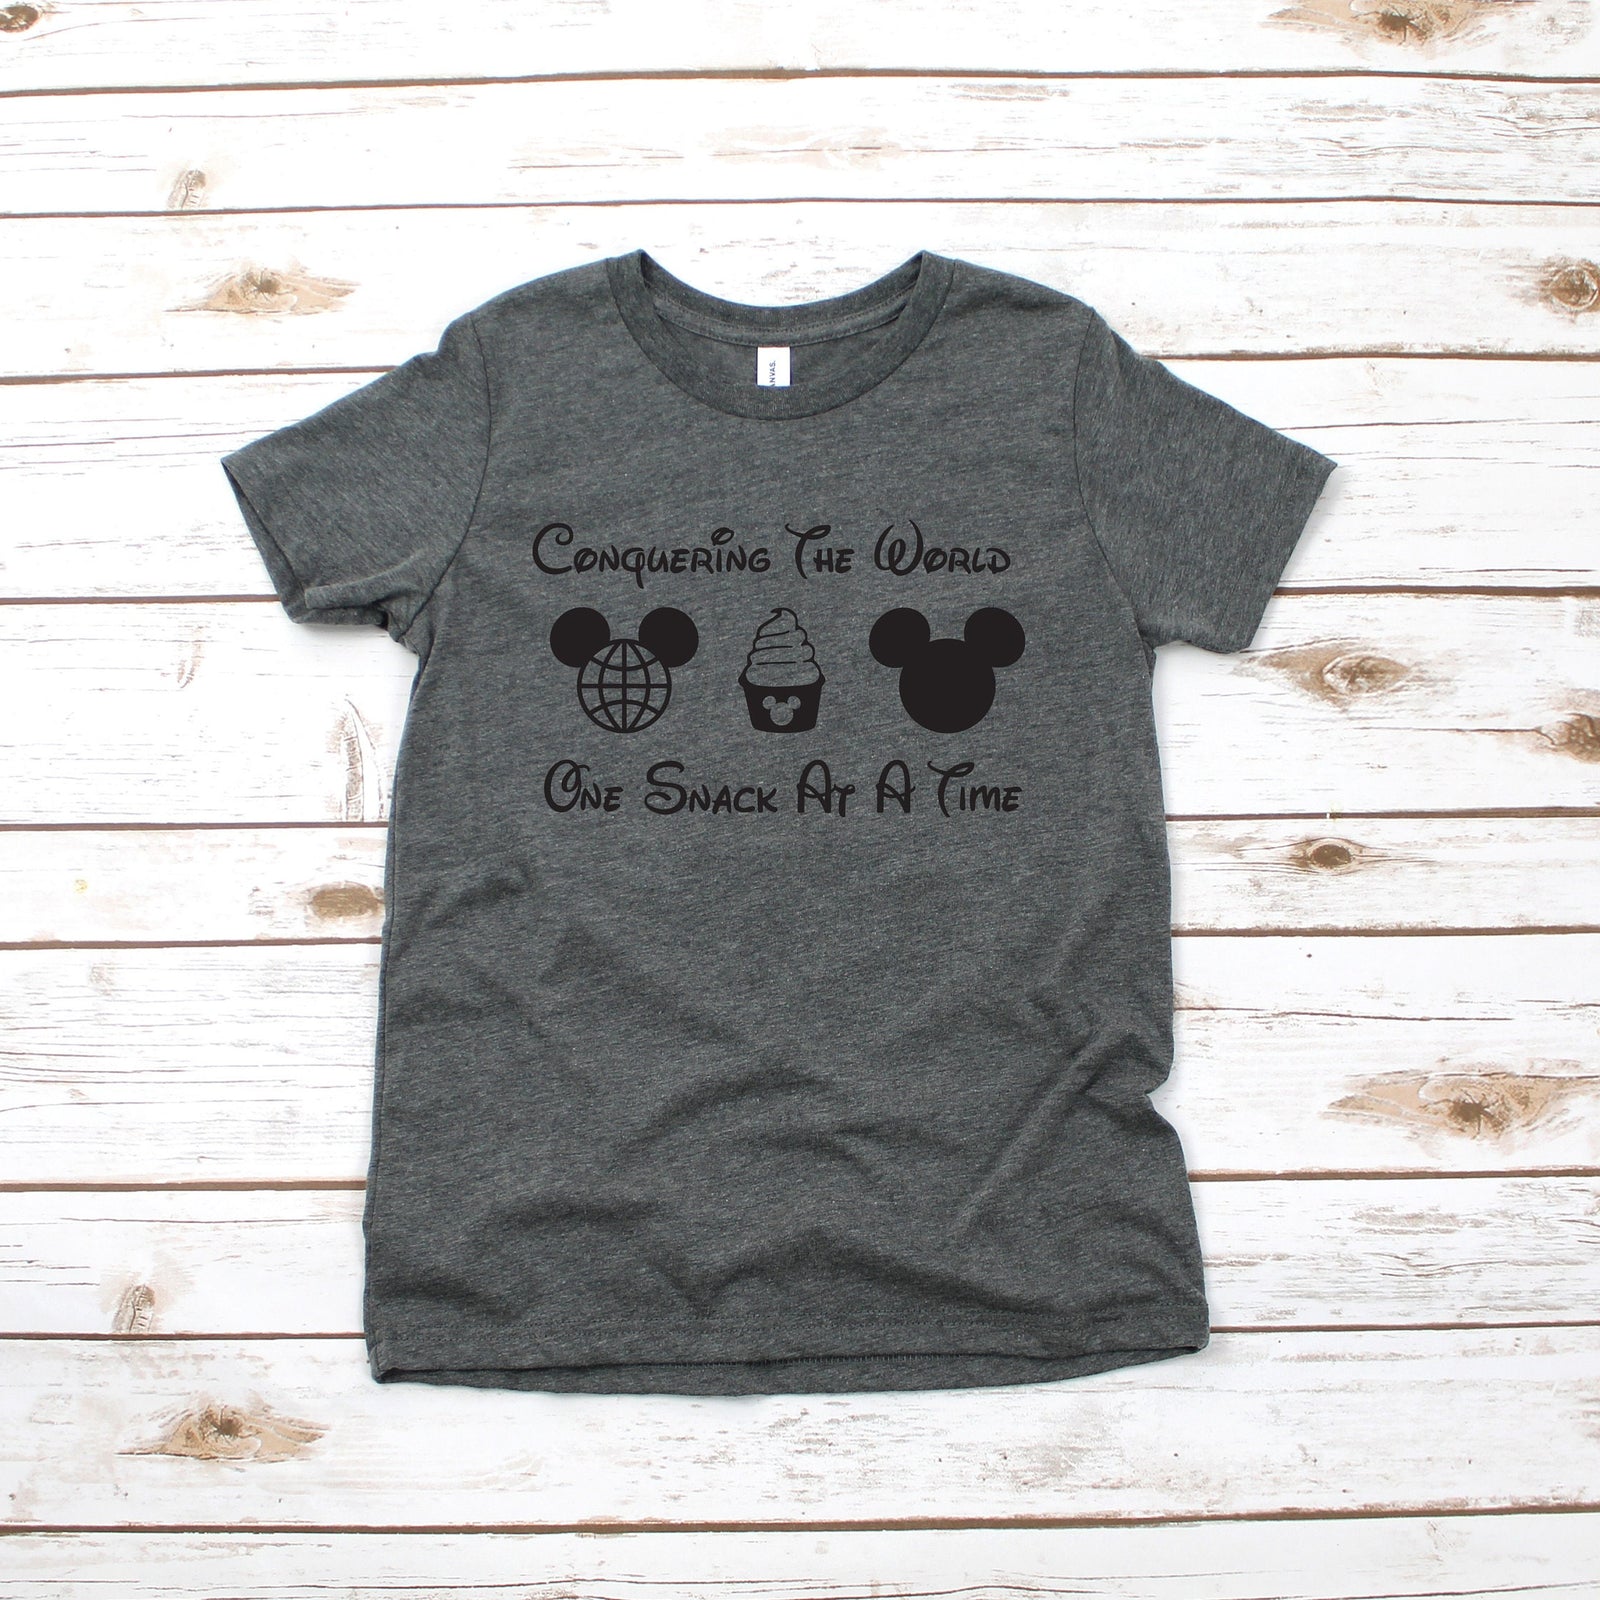 Conquering The World One Snack at a Time - Kids T Shirt - Infant Toddler Youth Mickey Shirt - Disney Kids Snack Goals Shirt